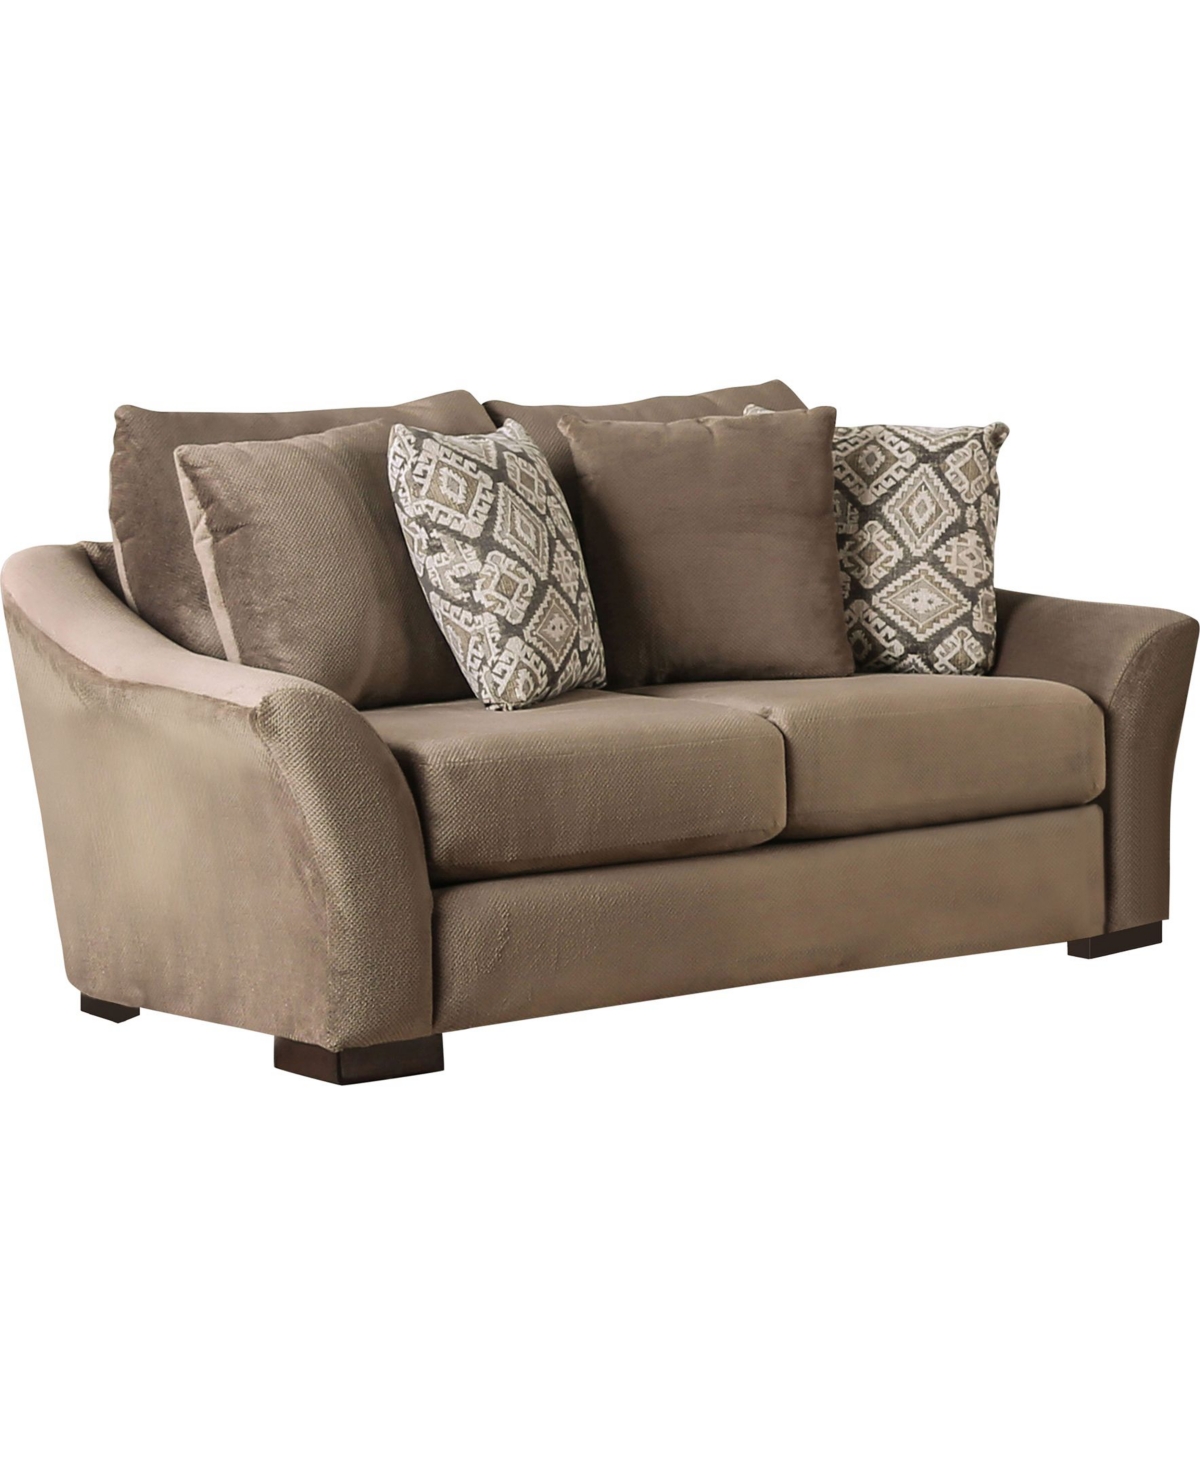 of America Mallena Upholstered Love Seat